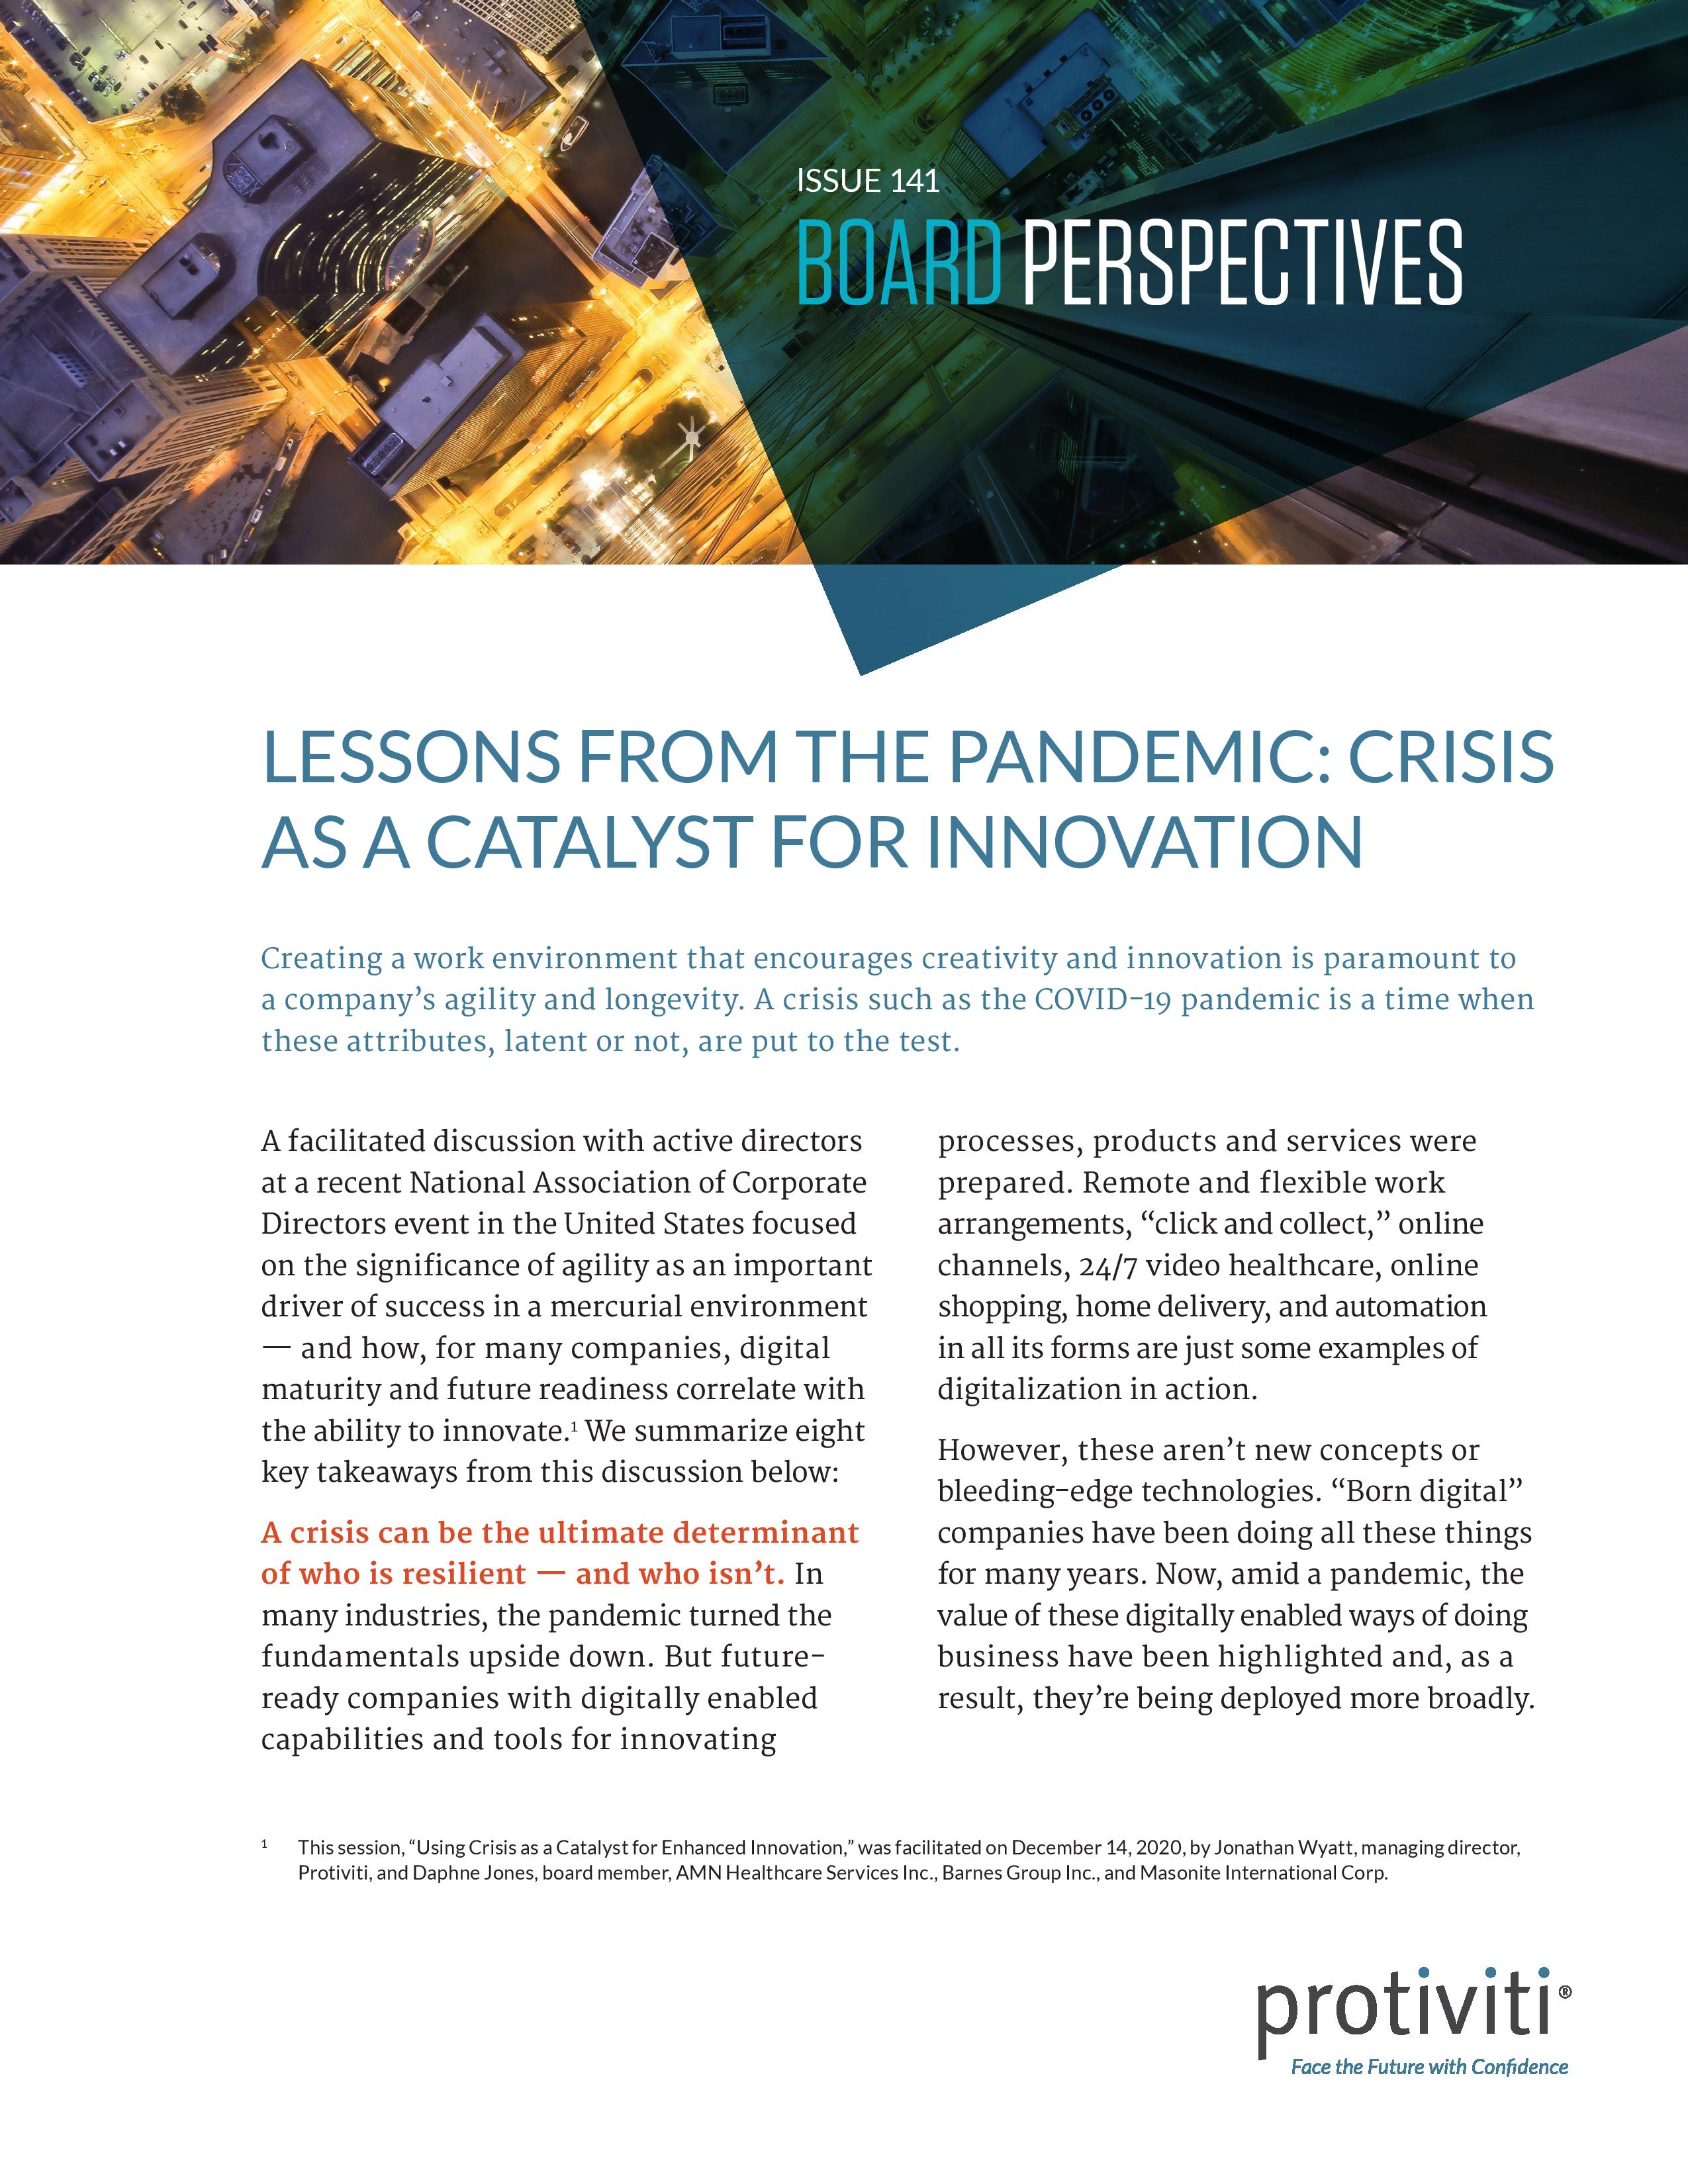 Screenshot of the first page of newsletter-bp-issue141-lessons-pandemic-crisis-catalyst-innovation-protiviti-page-001